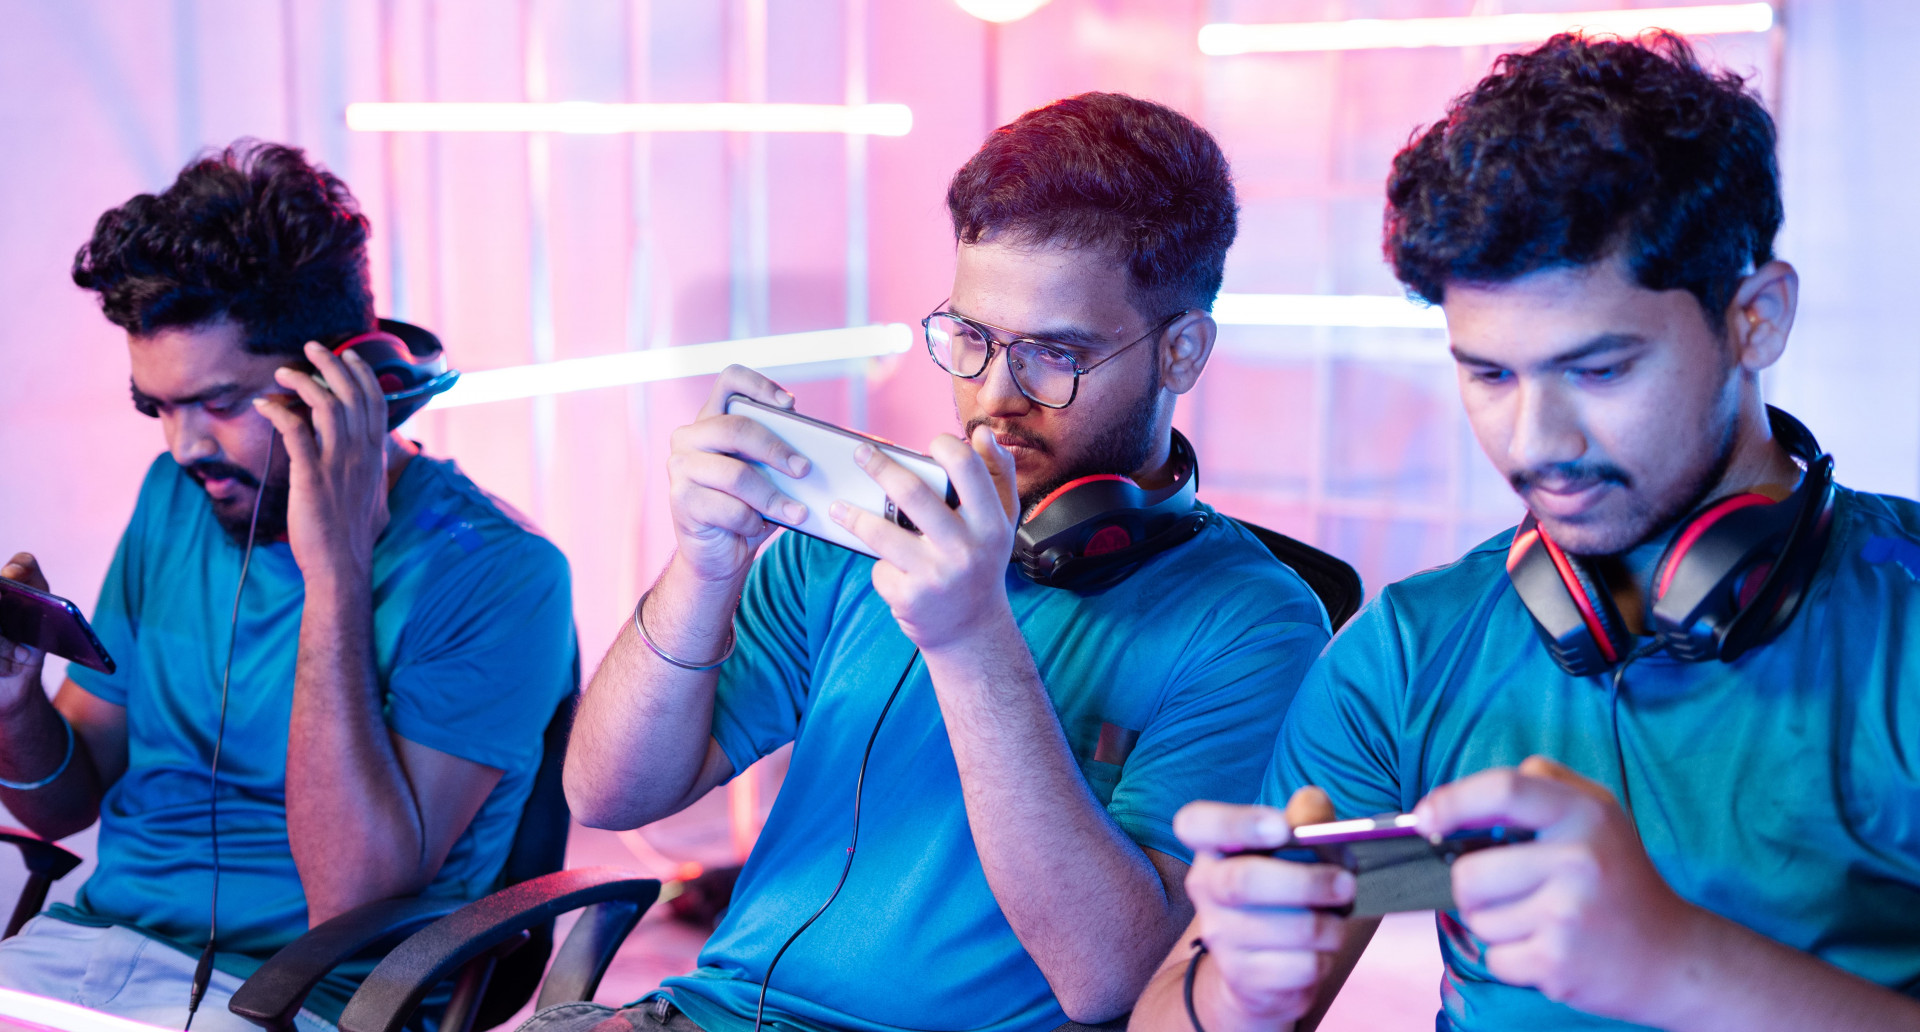 Esports on smartphones: The future of the industry?